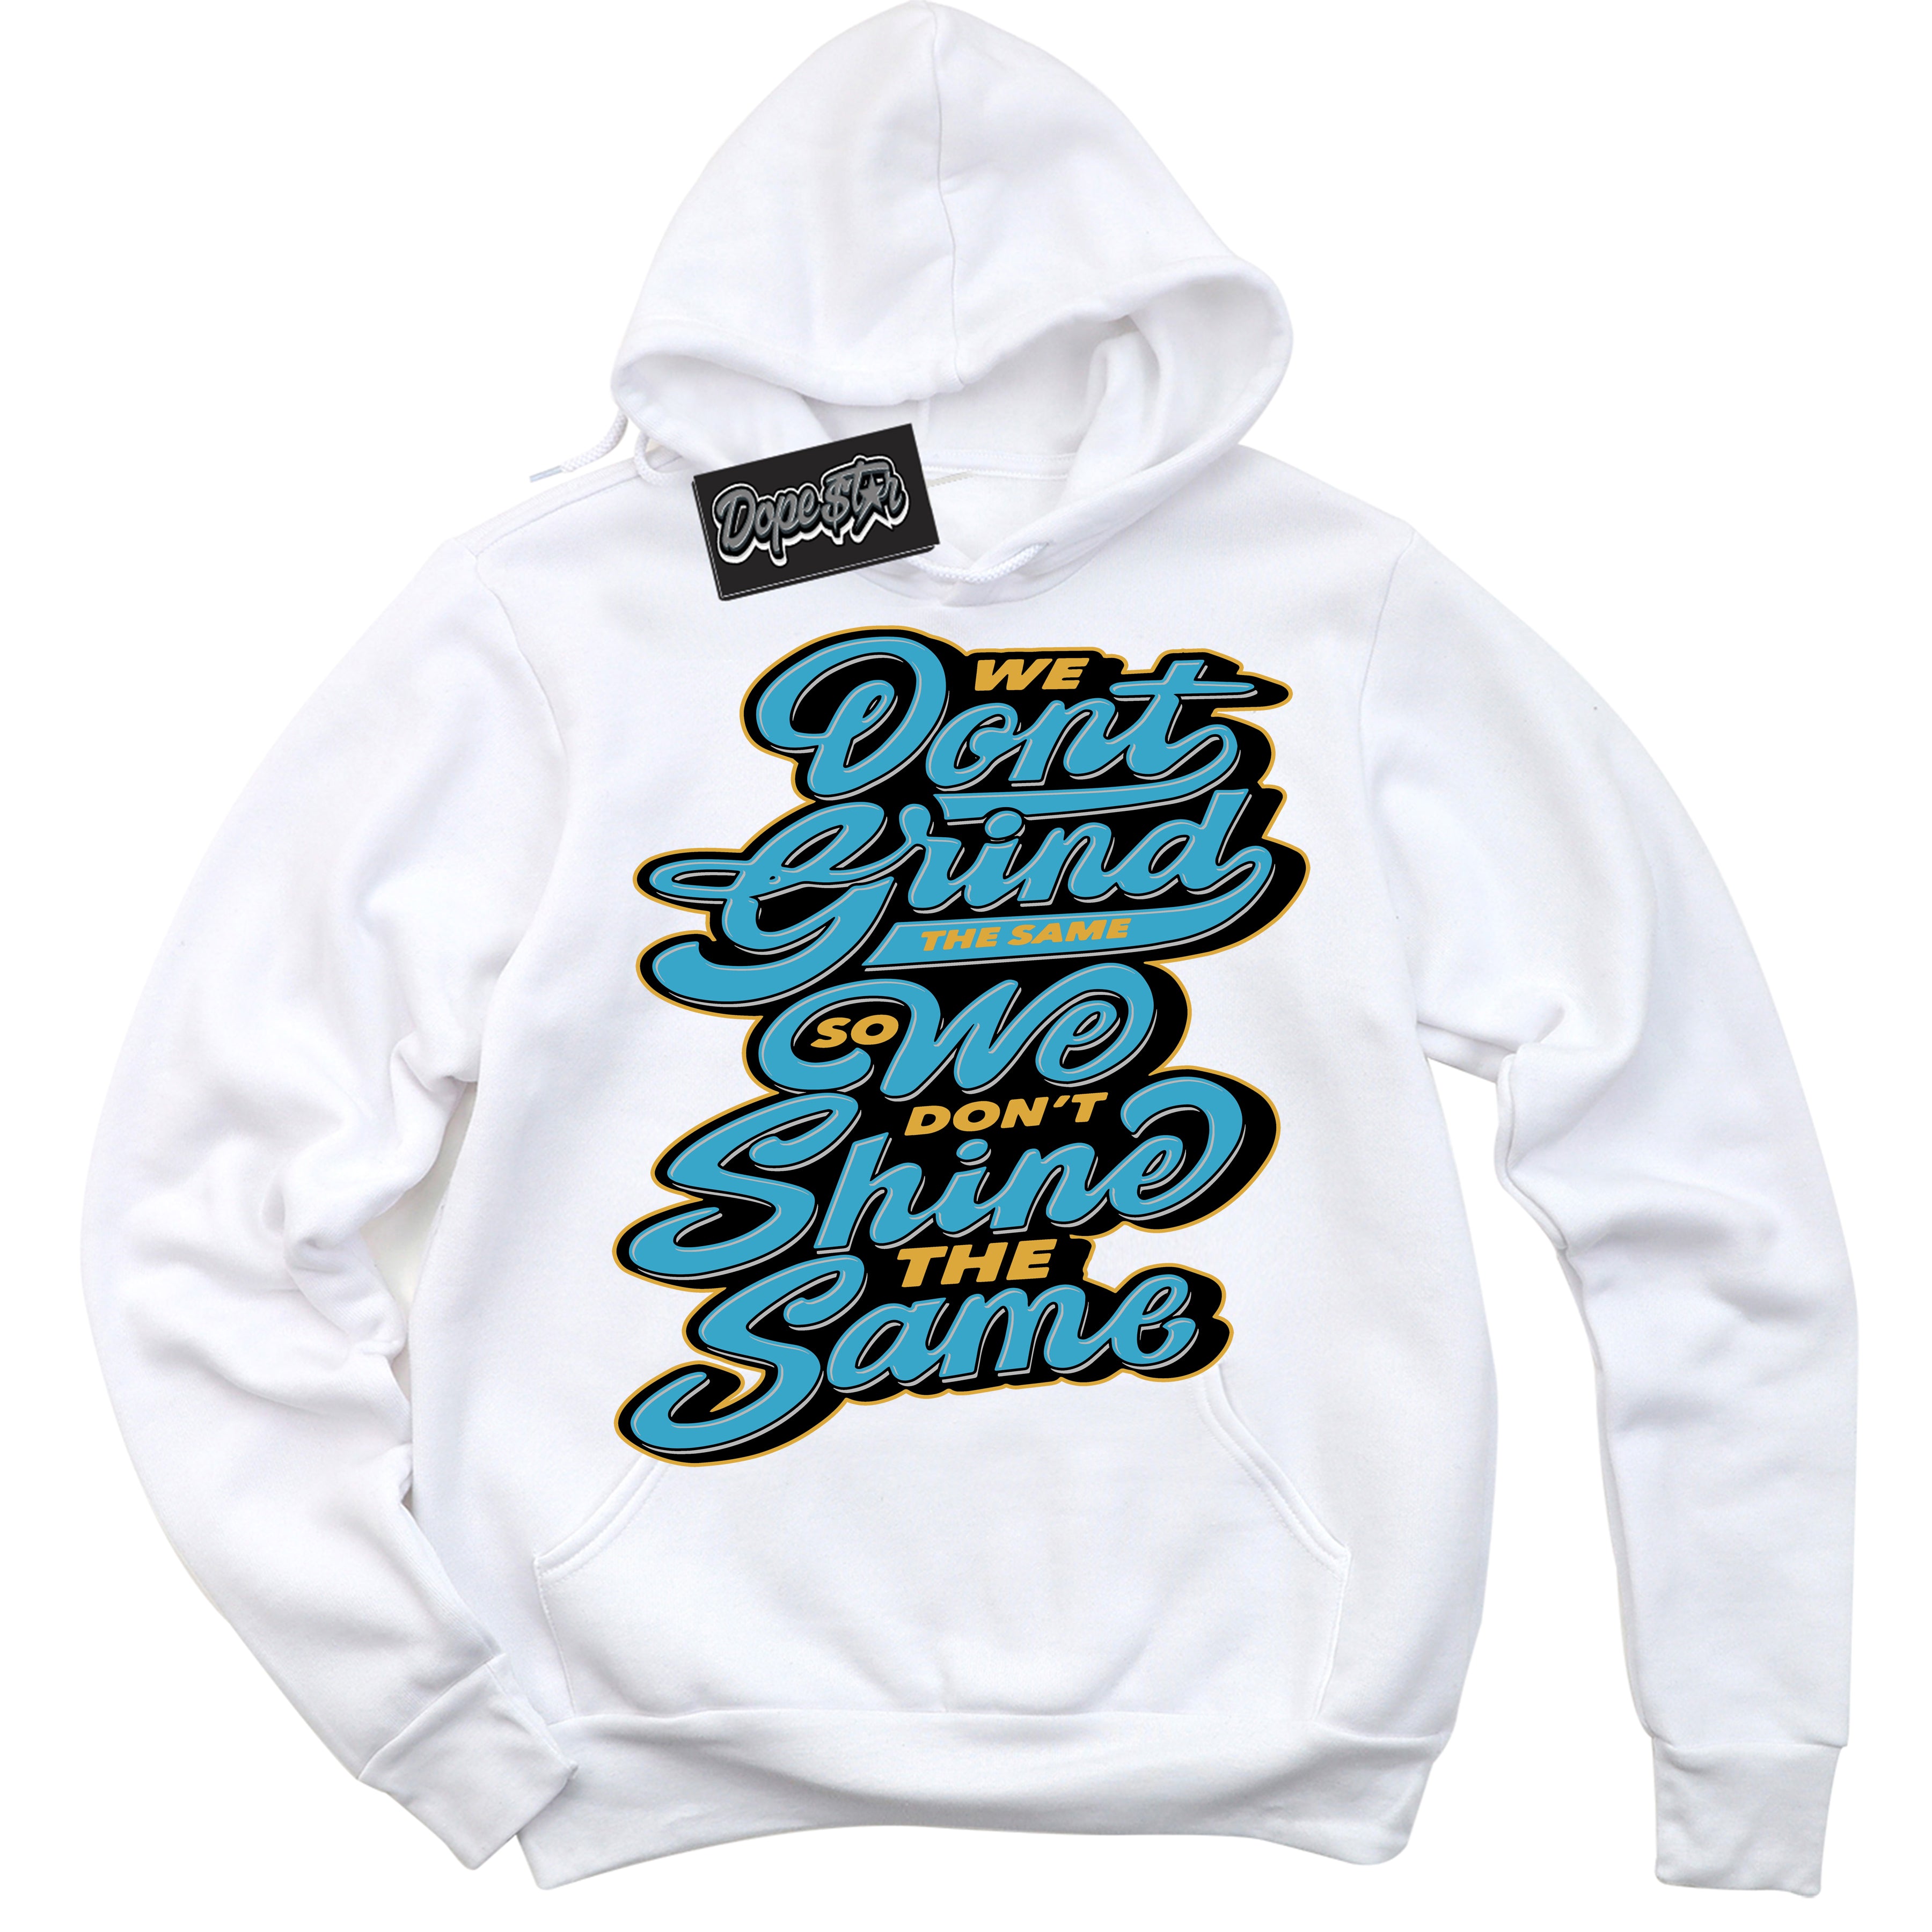 Cool White Hoodie with “ Grind Shine ”  design that Perfectly Matches Aqua 5s Sneakers.